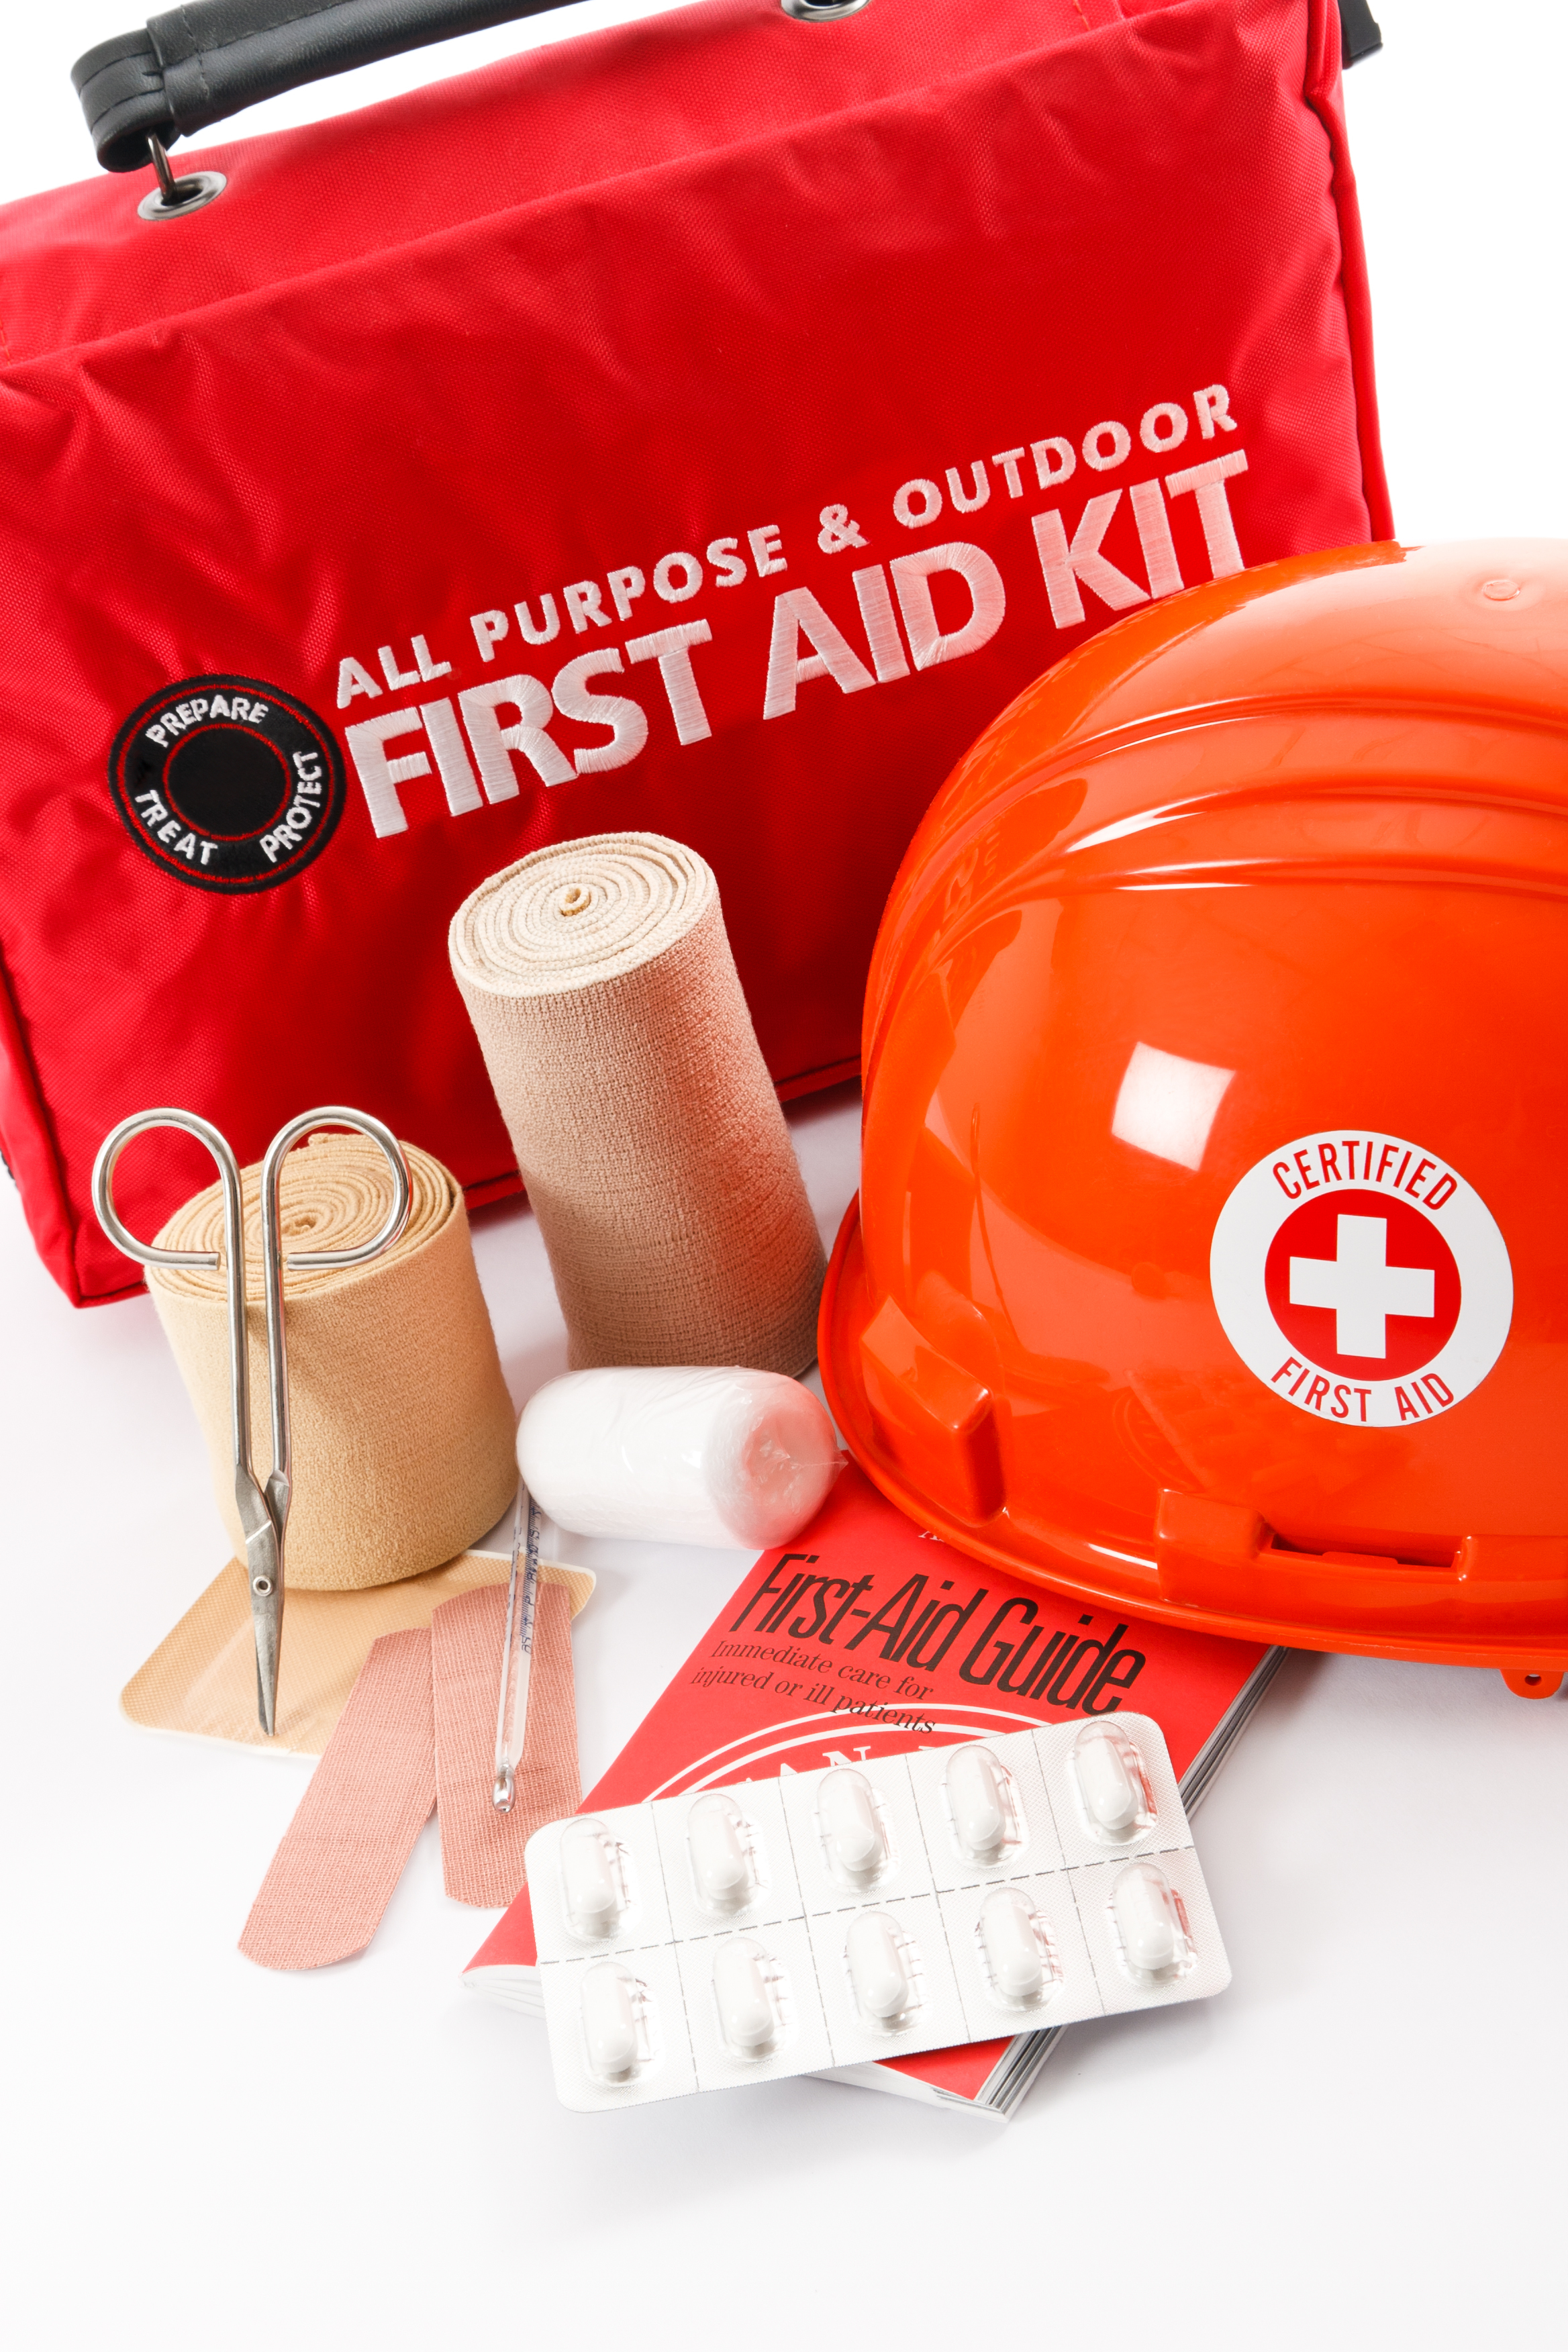 First Aid kit with bandages and scissors